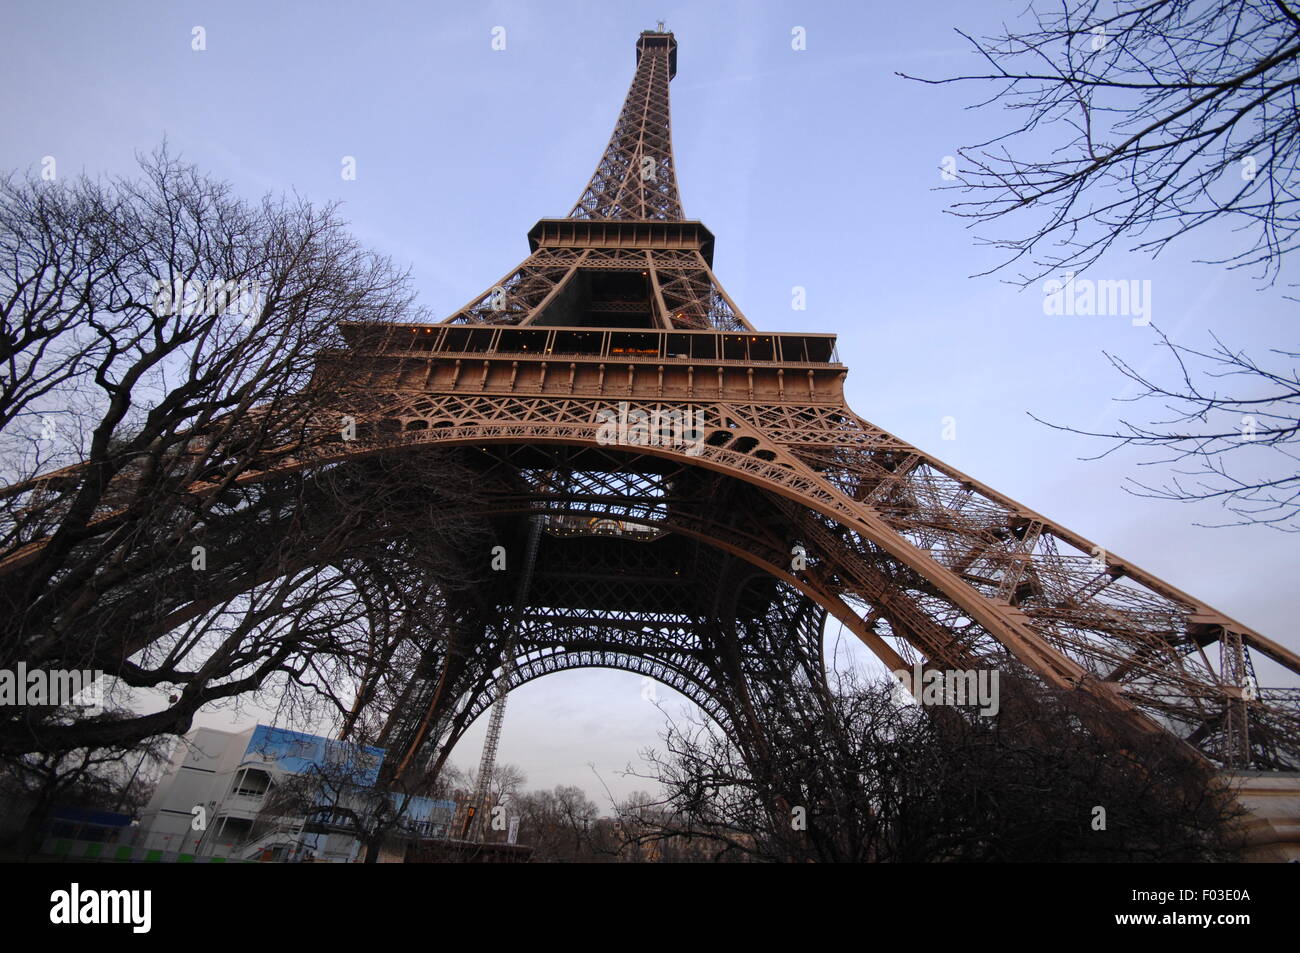 A view of the Eiffel Tower overlooking the city of Paris on the River Seine Stock Photo